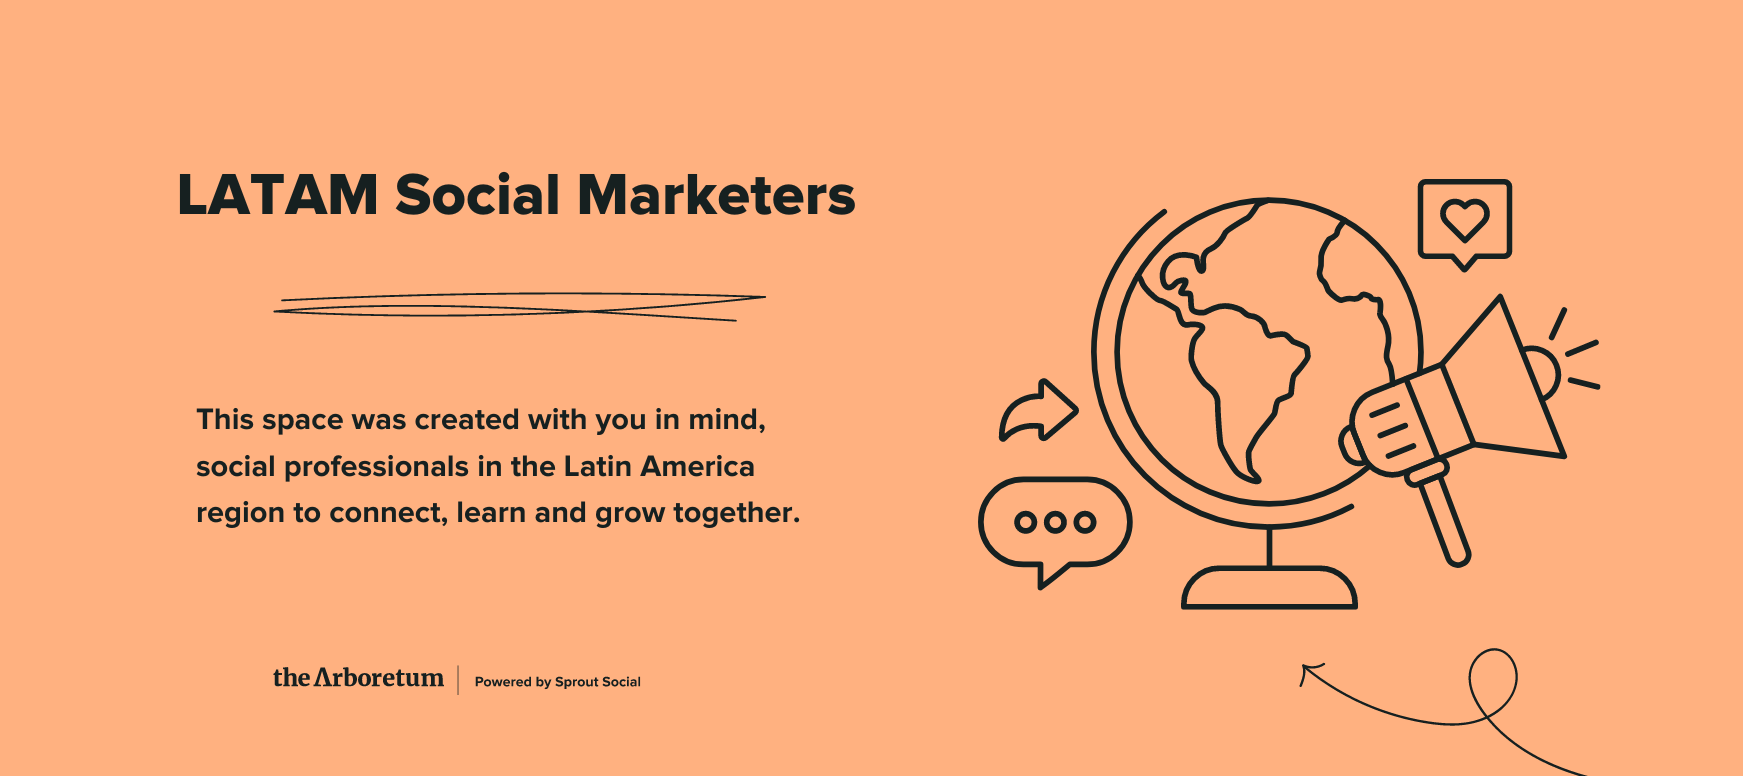 Welcome LATAM Social Marketers!